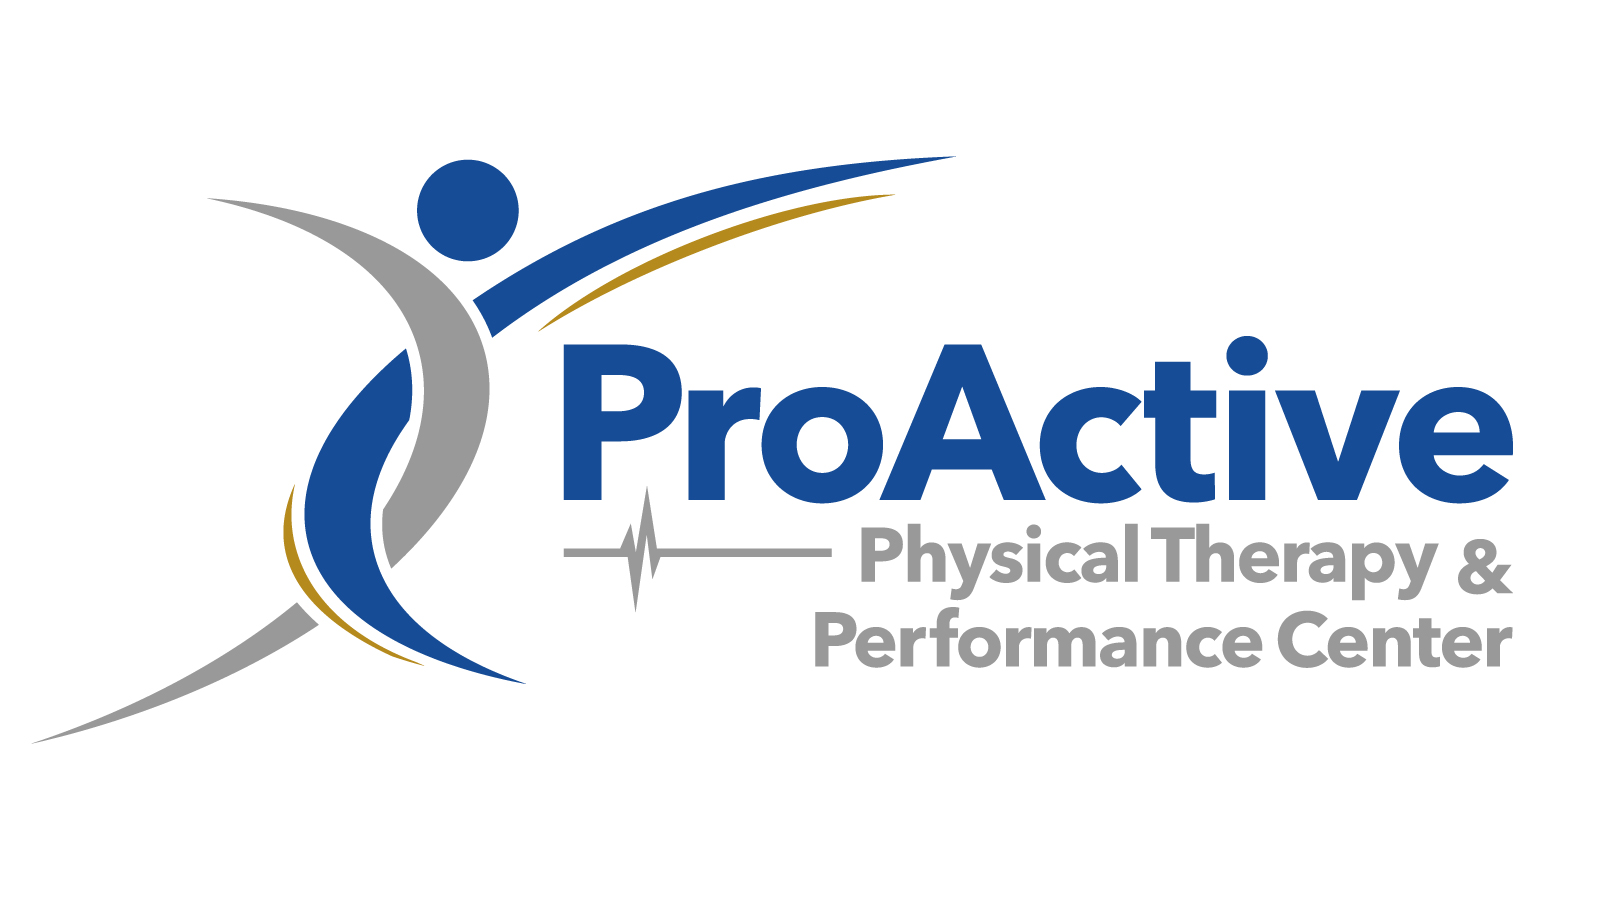 ProActive Physical Therapy and Performance Center